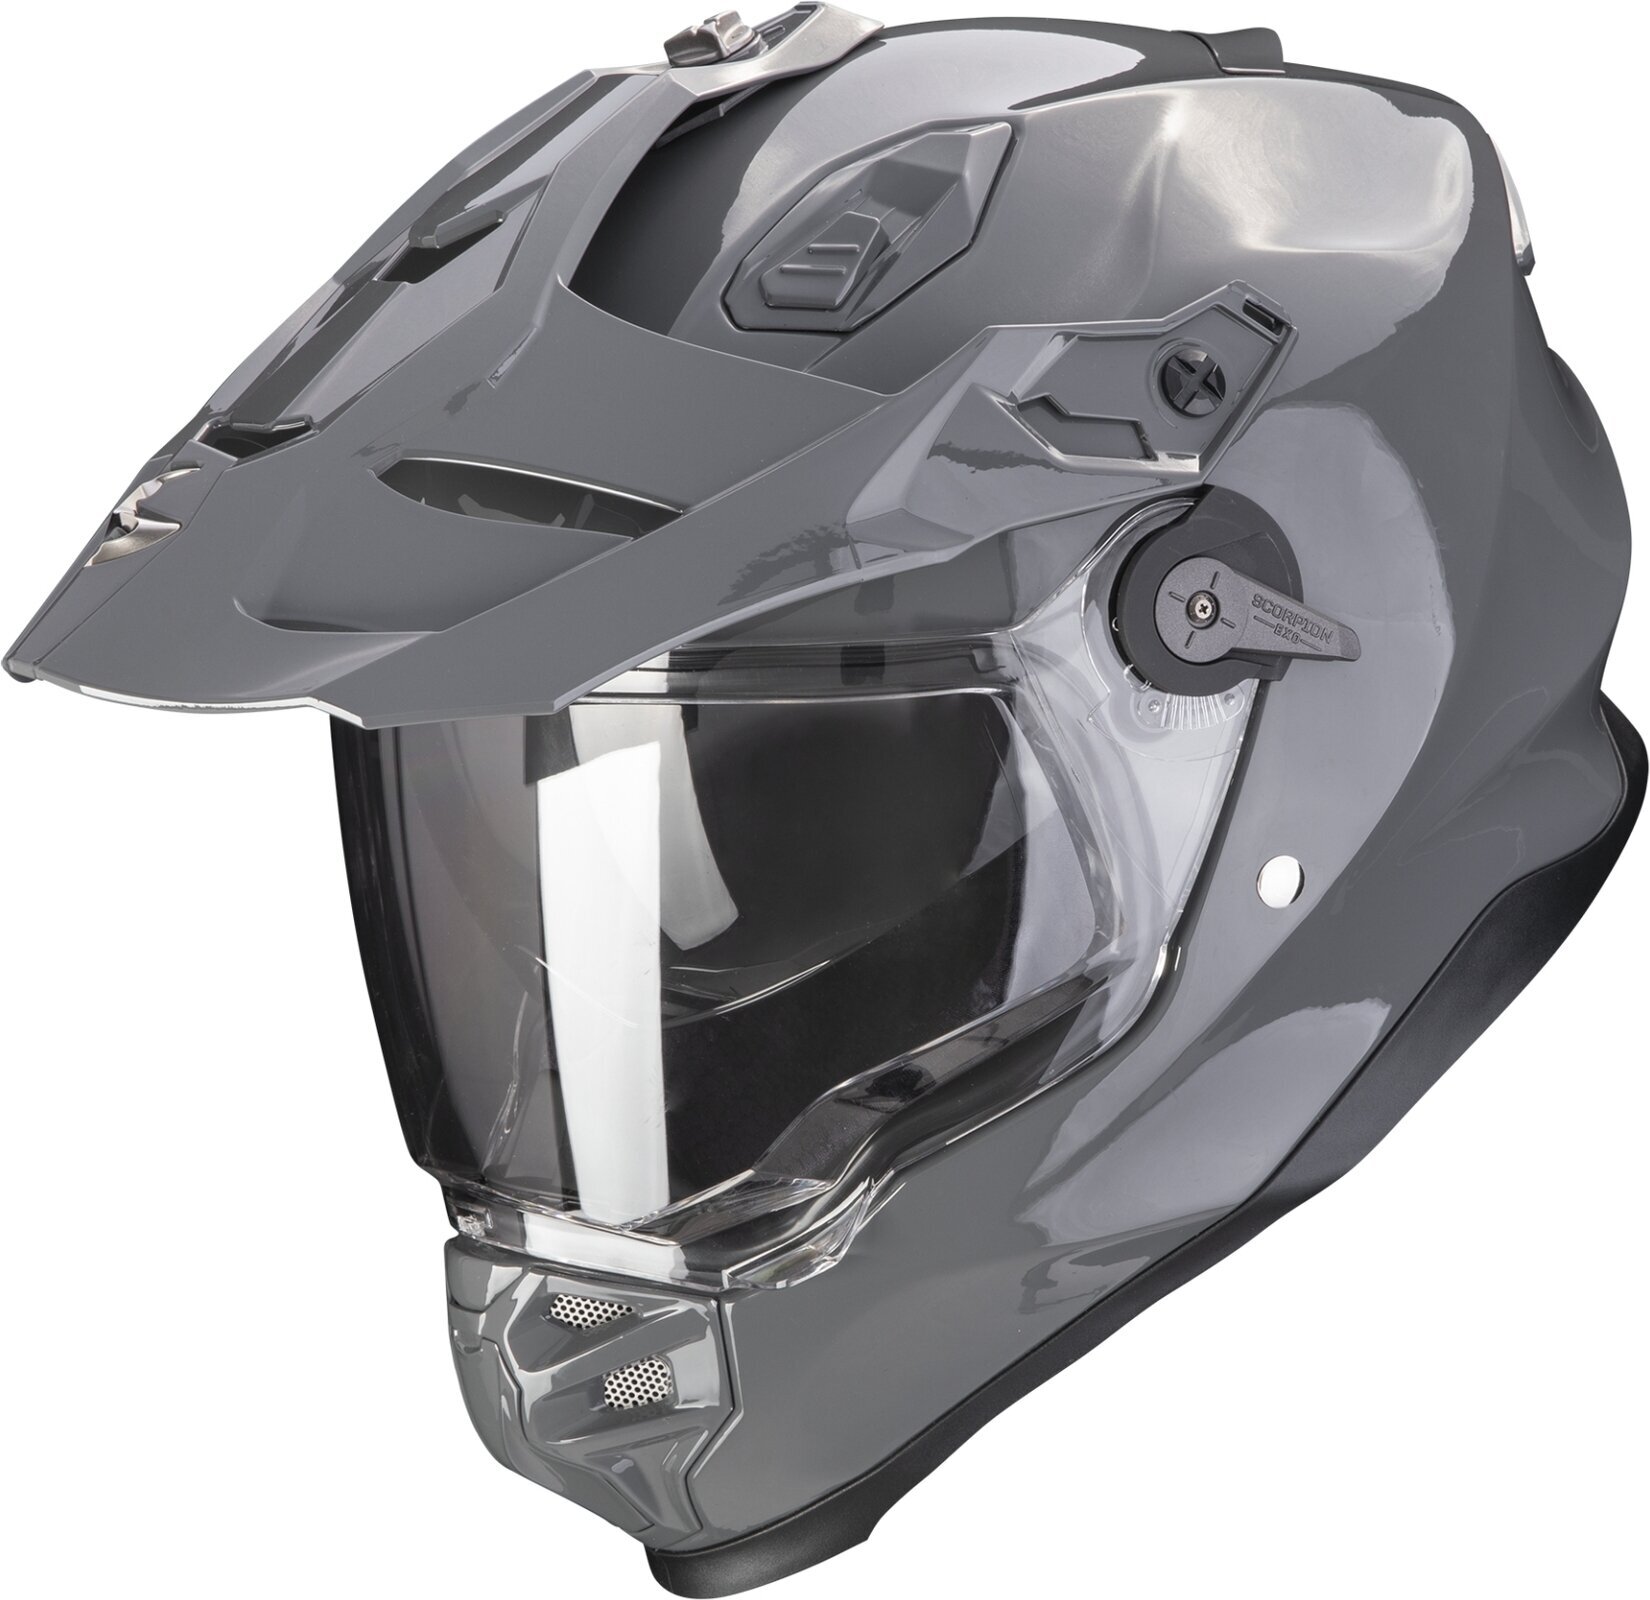 Kask Scorpion ADF-9000 AIR SOLID Cement Grey M Kask